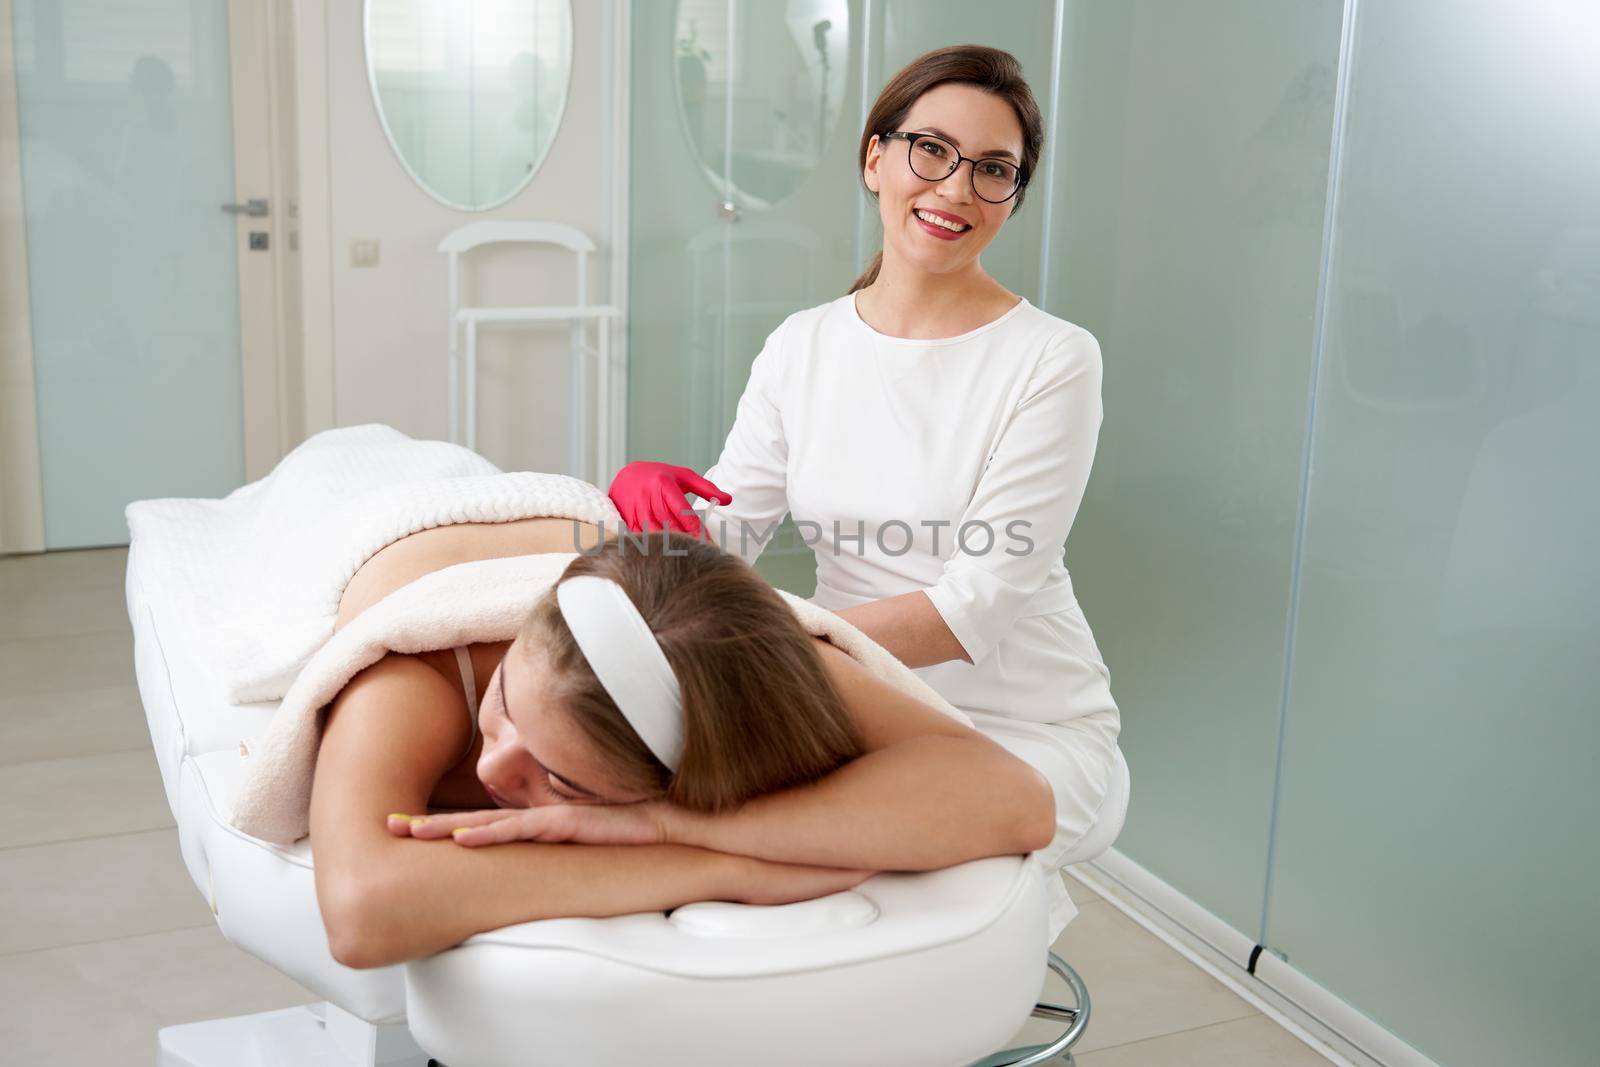 Young woman getting fat reductive skin lifting body treatment by cosmetologist. Attractive female patient enjoying slimming body contouring procedure